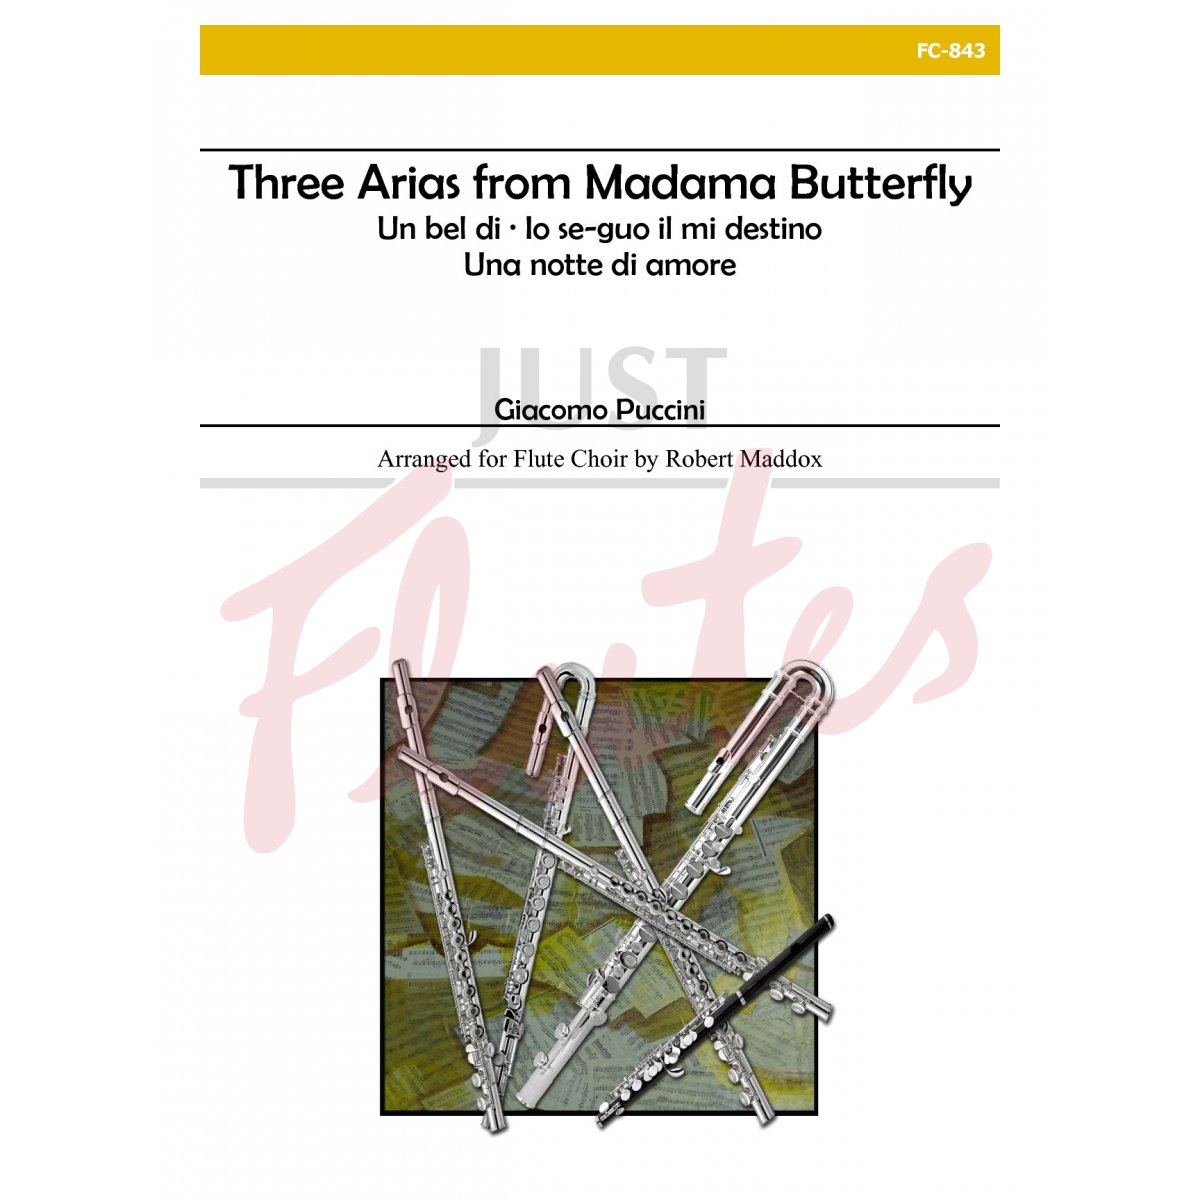 Three Arias from Madama Butterfly for Flute Choir